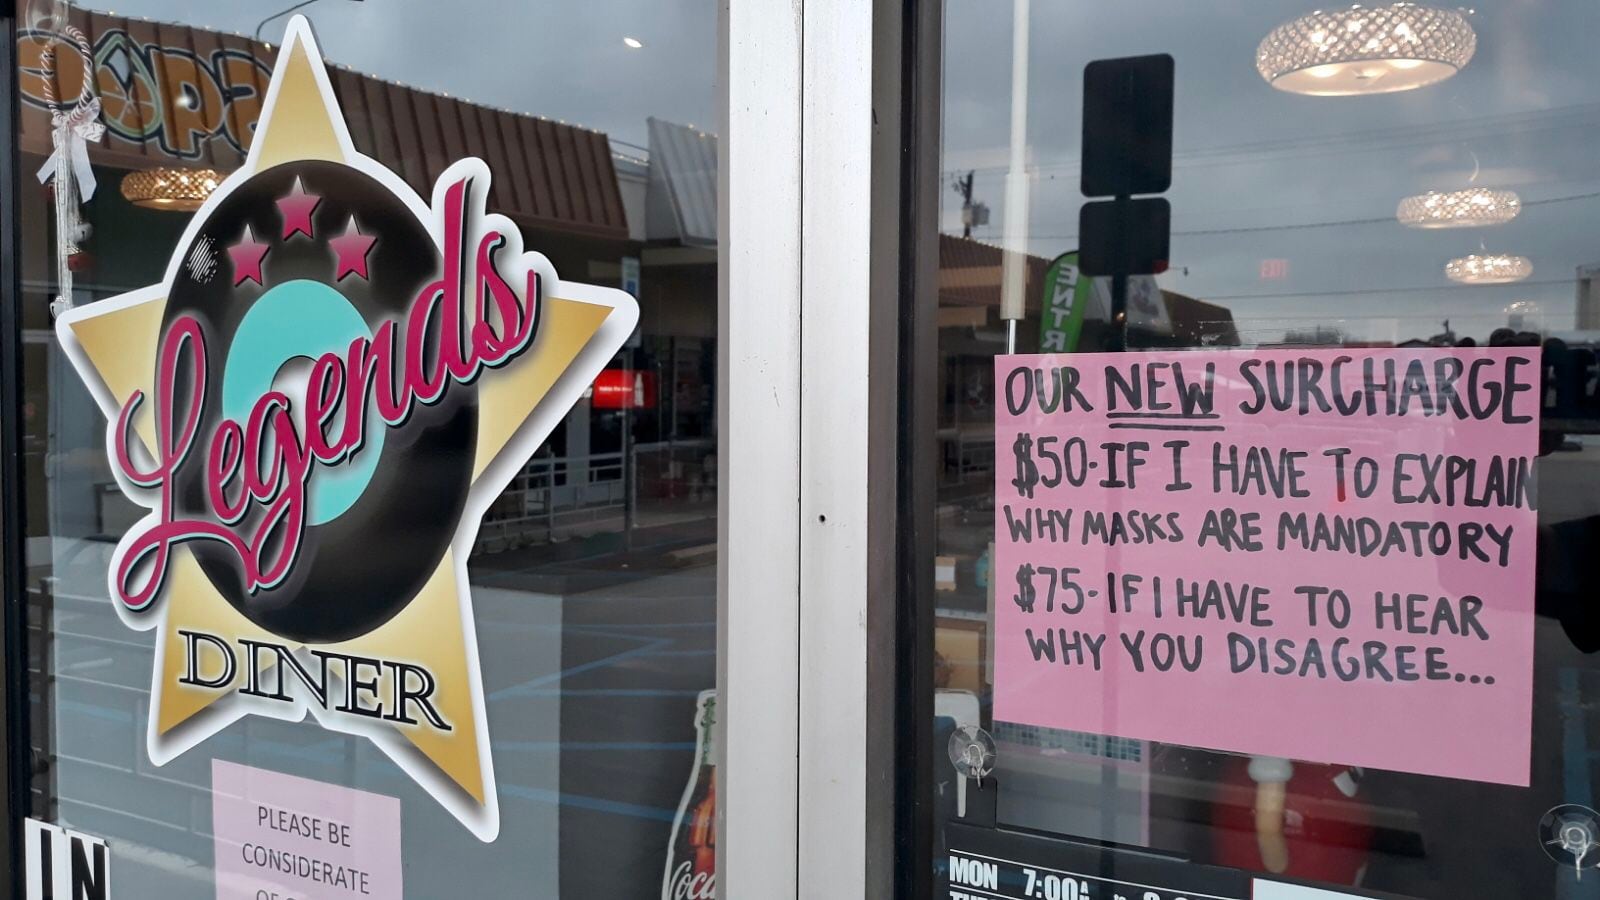 The owner of Legends Diner in Denton posted a sign on the restaurant in mid-March 2021,...